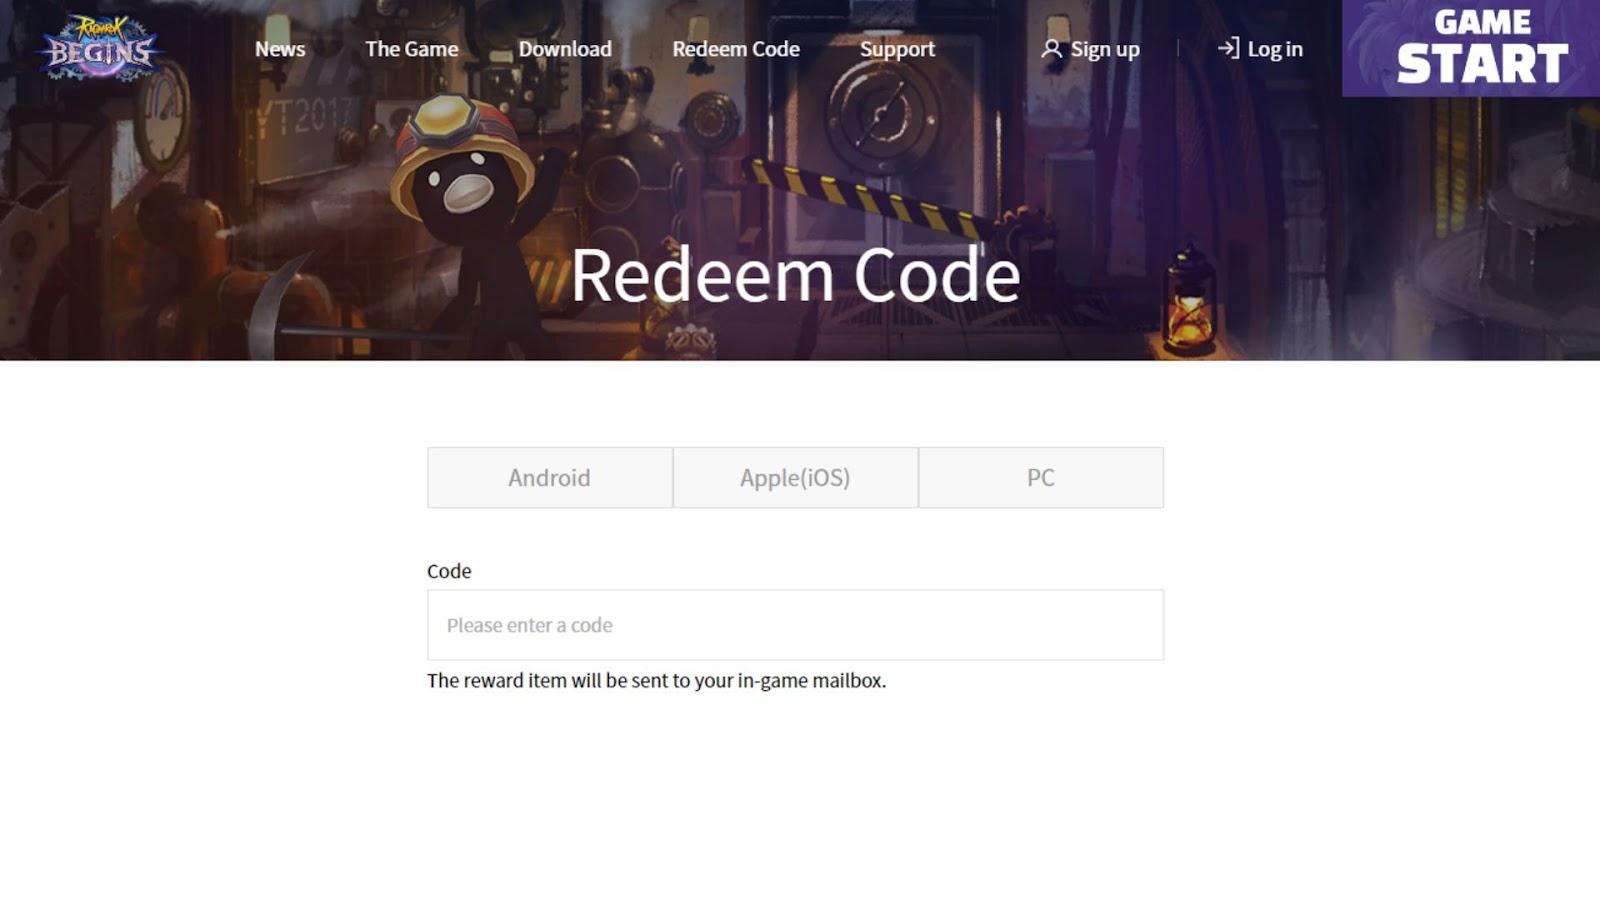 How to Redeem Your Codes Properly